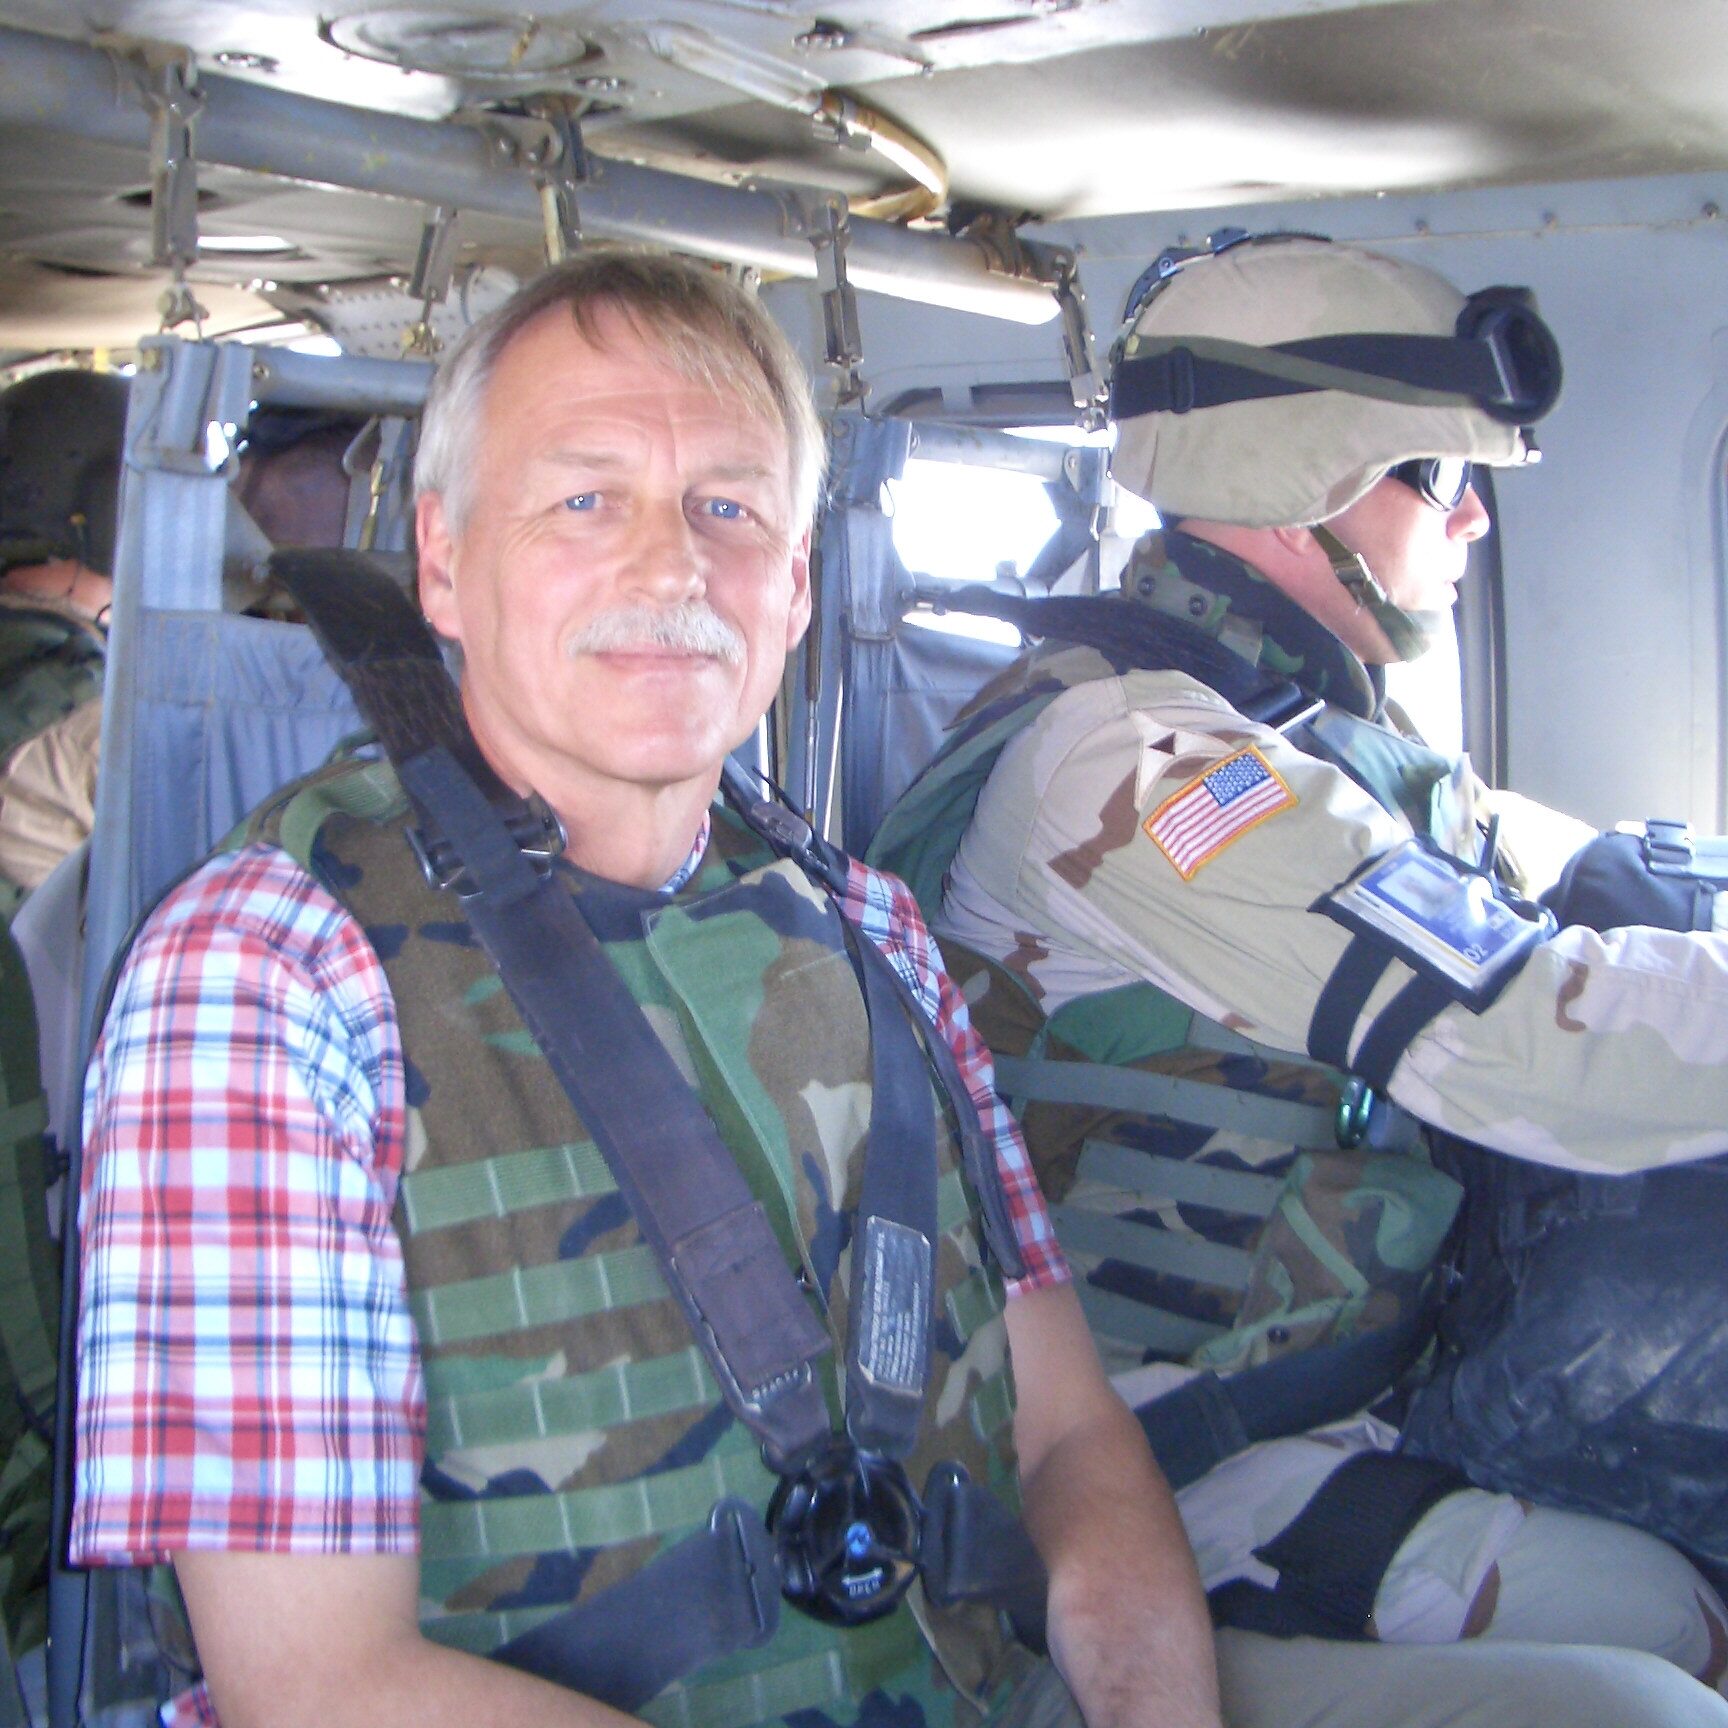 Snyder rides in a helicopter wearing a bulletproof vest. A gunman is seated beside him looking out the helicopter window